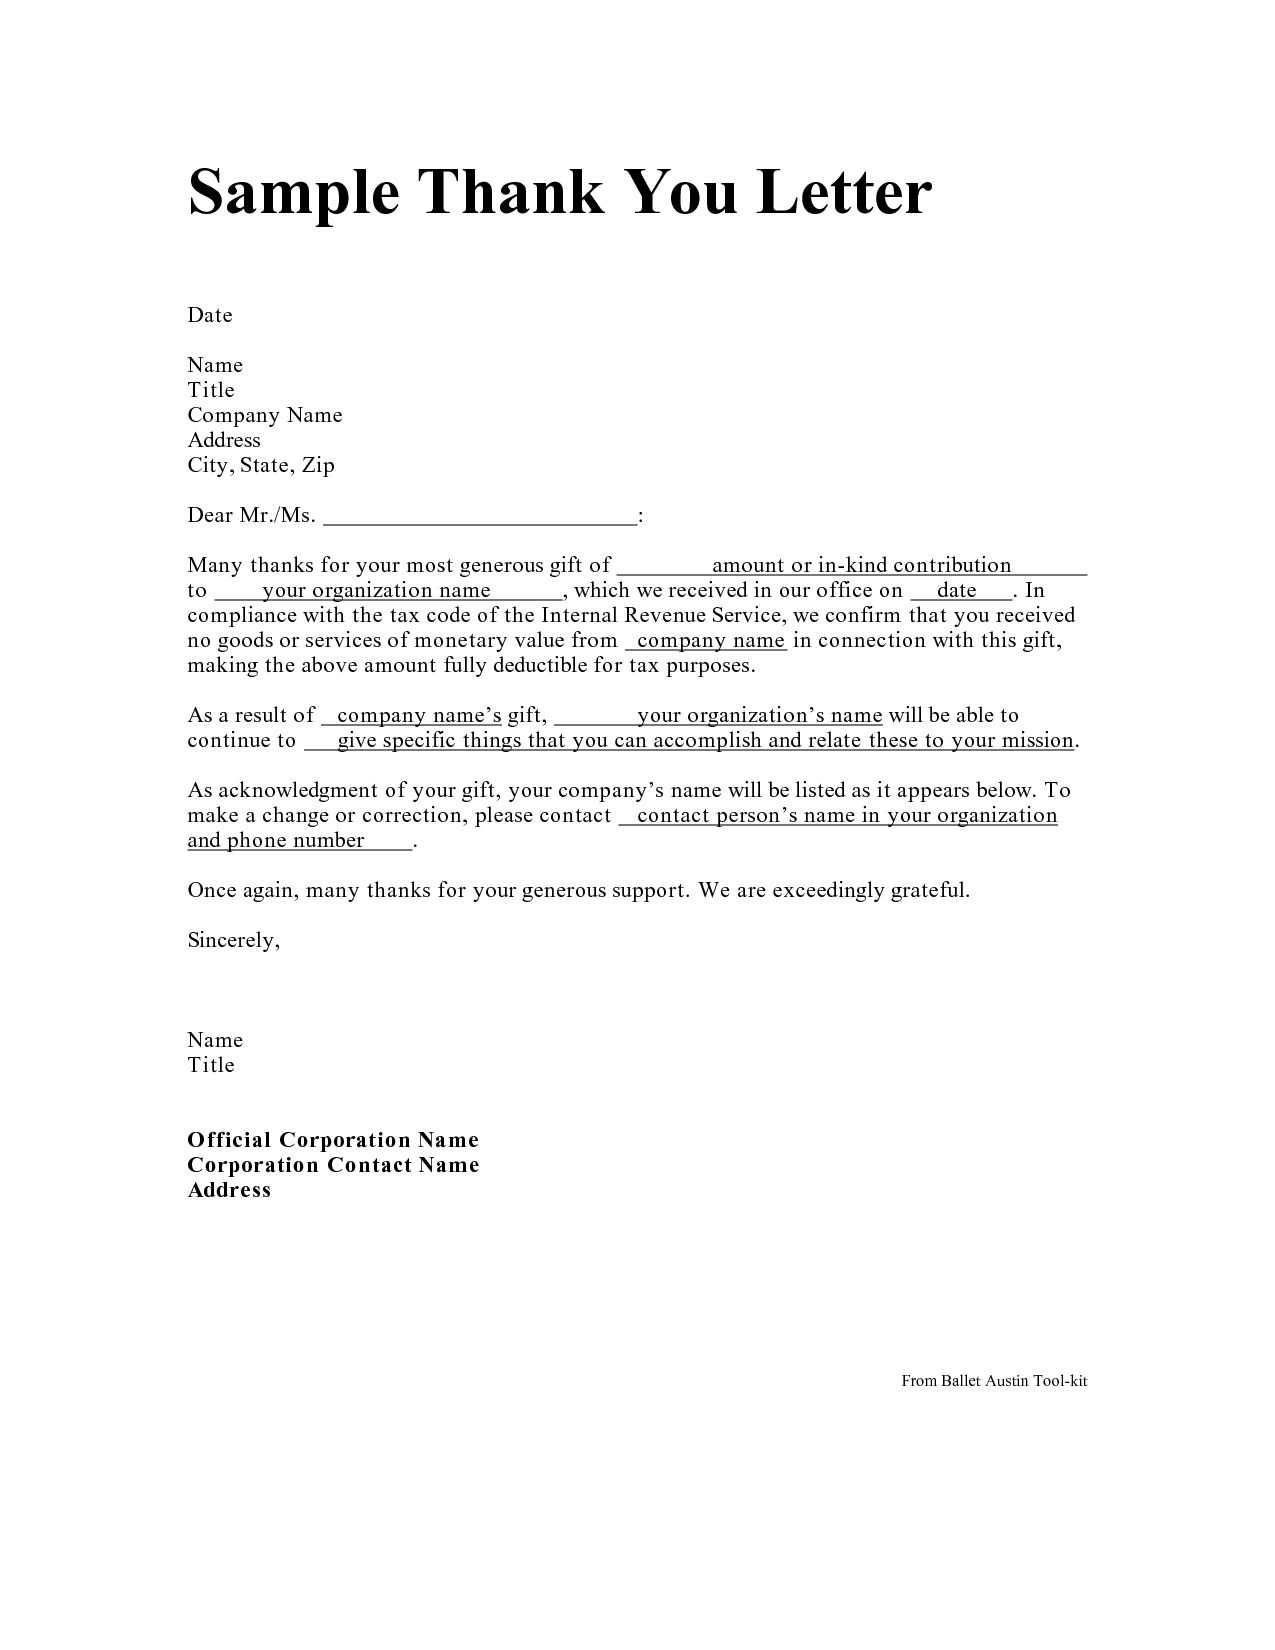 Financial Support Letter Template - Personal Thank You Letter Personal Thank You Letter Samples